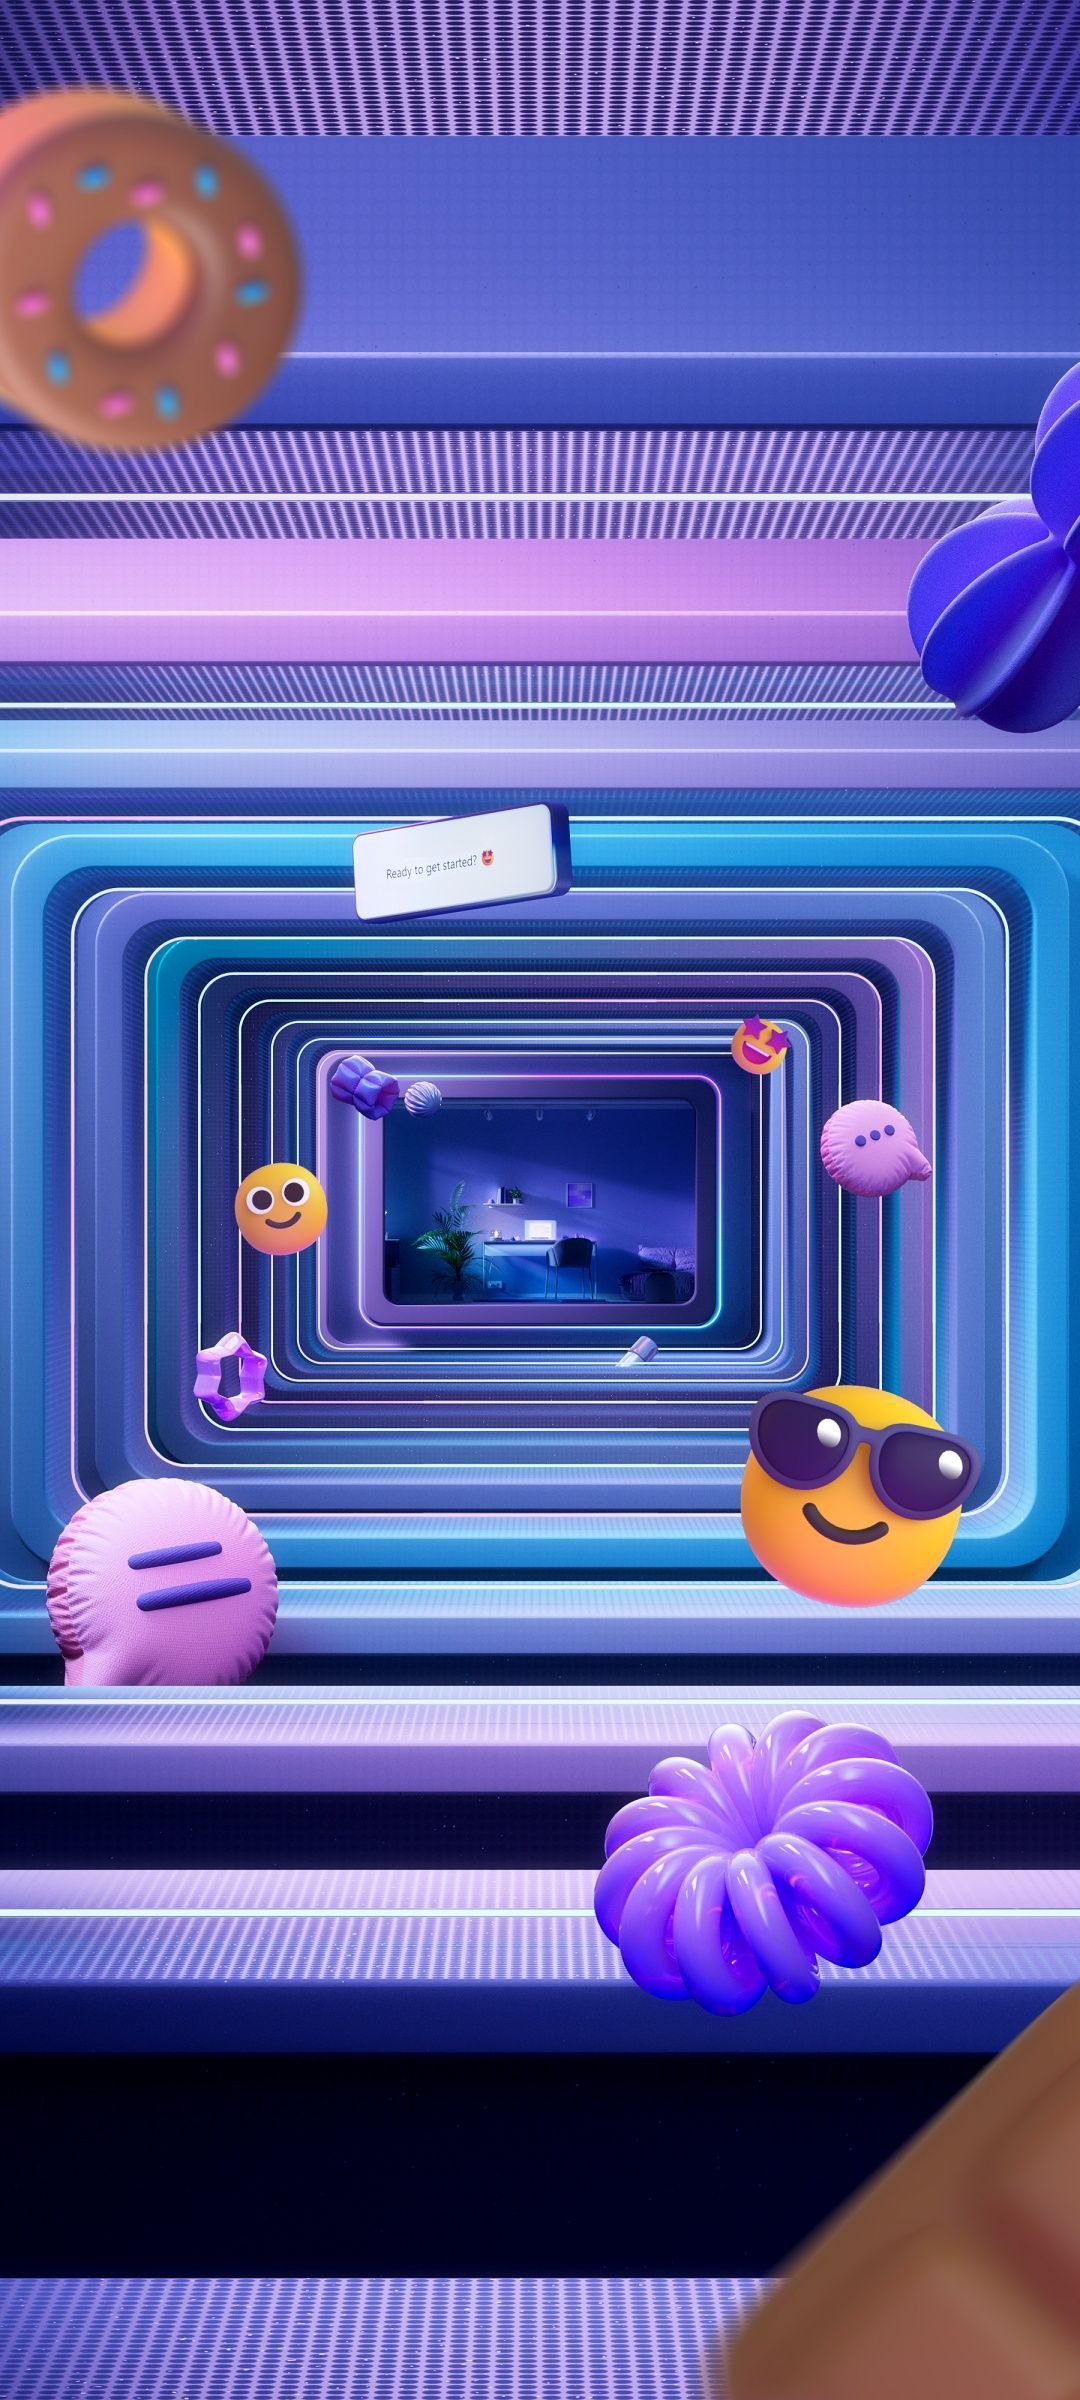 A phone wallpaper with a purple background and emoji characters. - Emoji